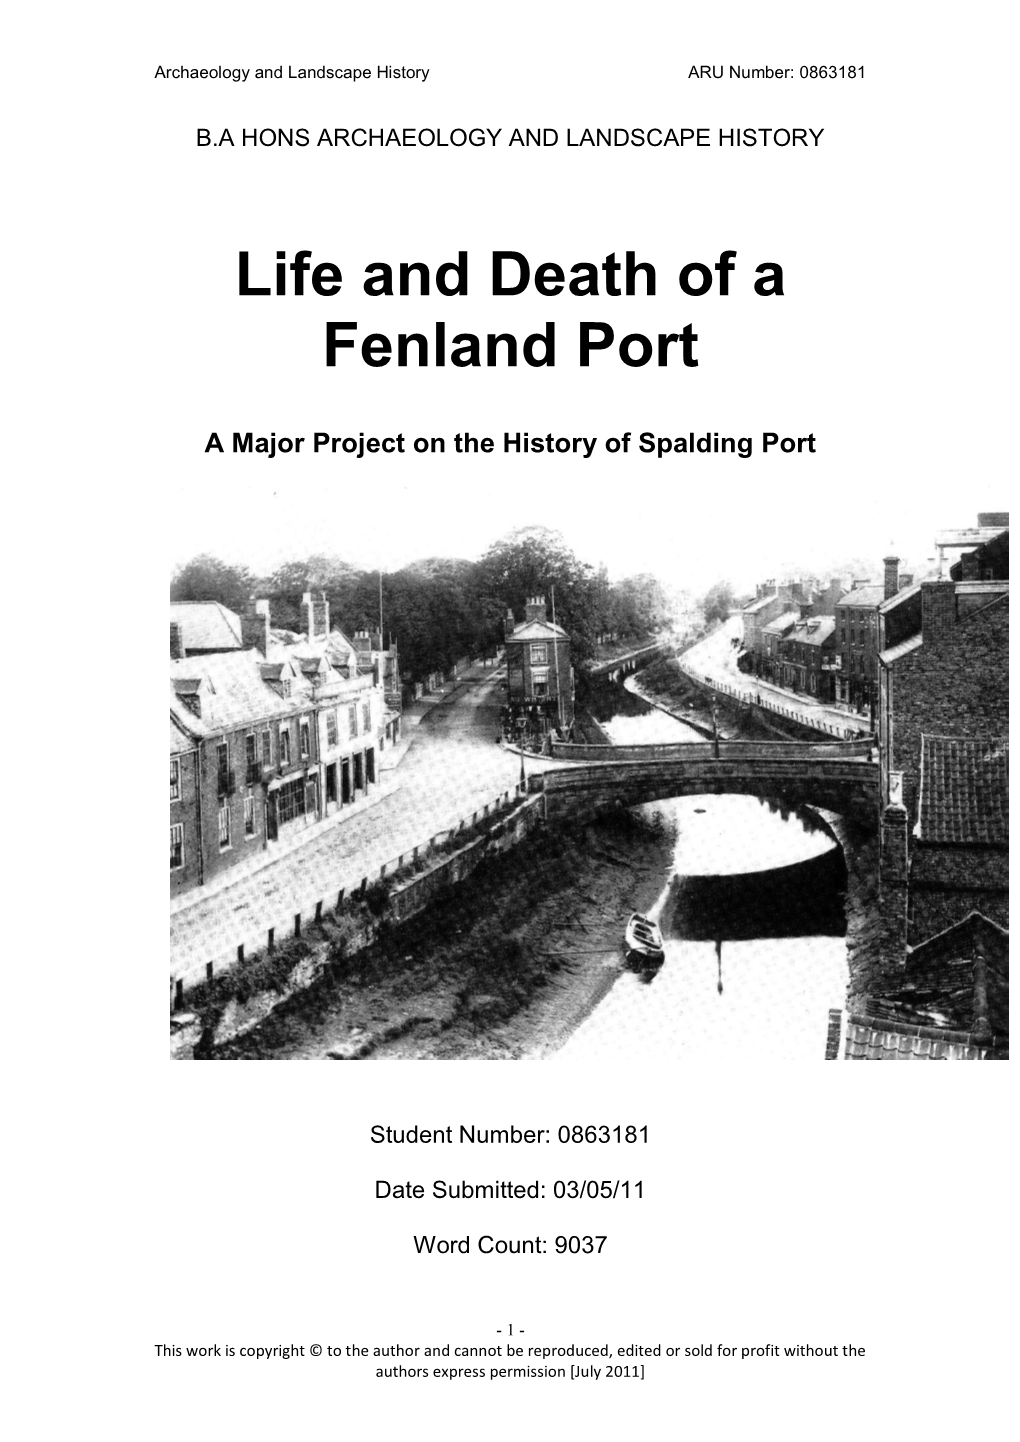 Life and Death of a Fenland Port